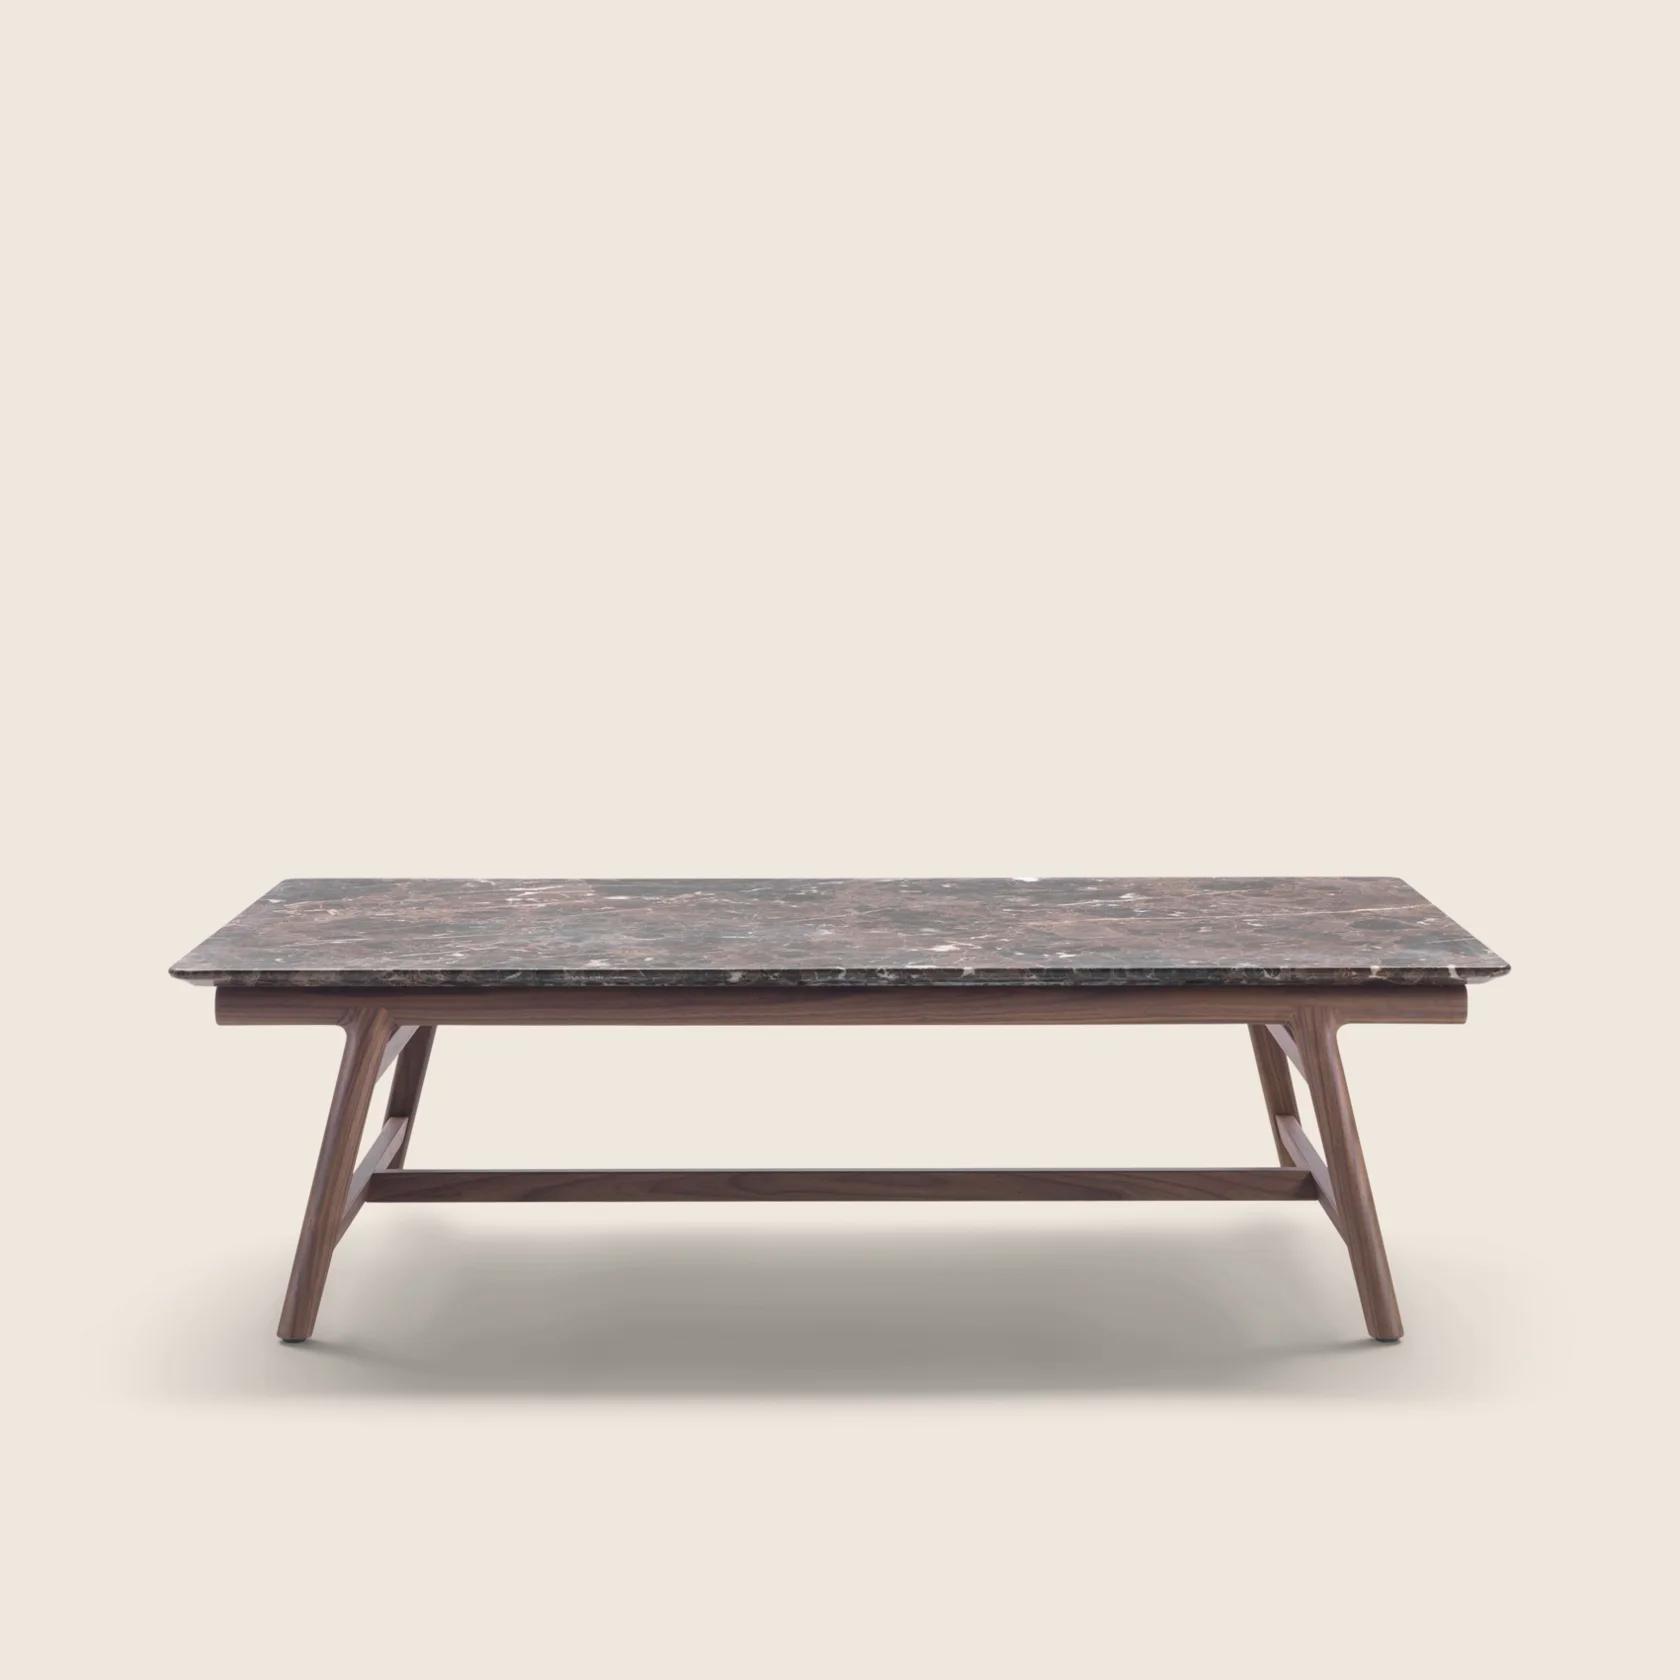 022570_GIANO_COFFEETABLE (2).png